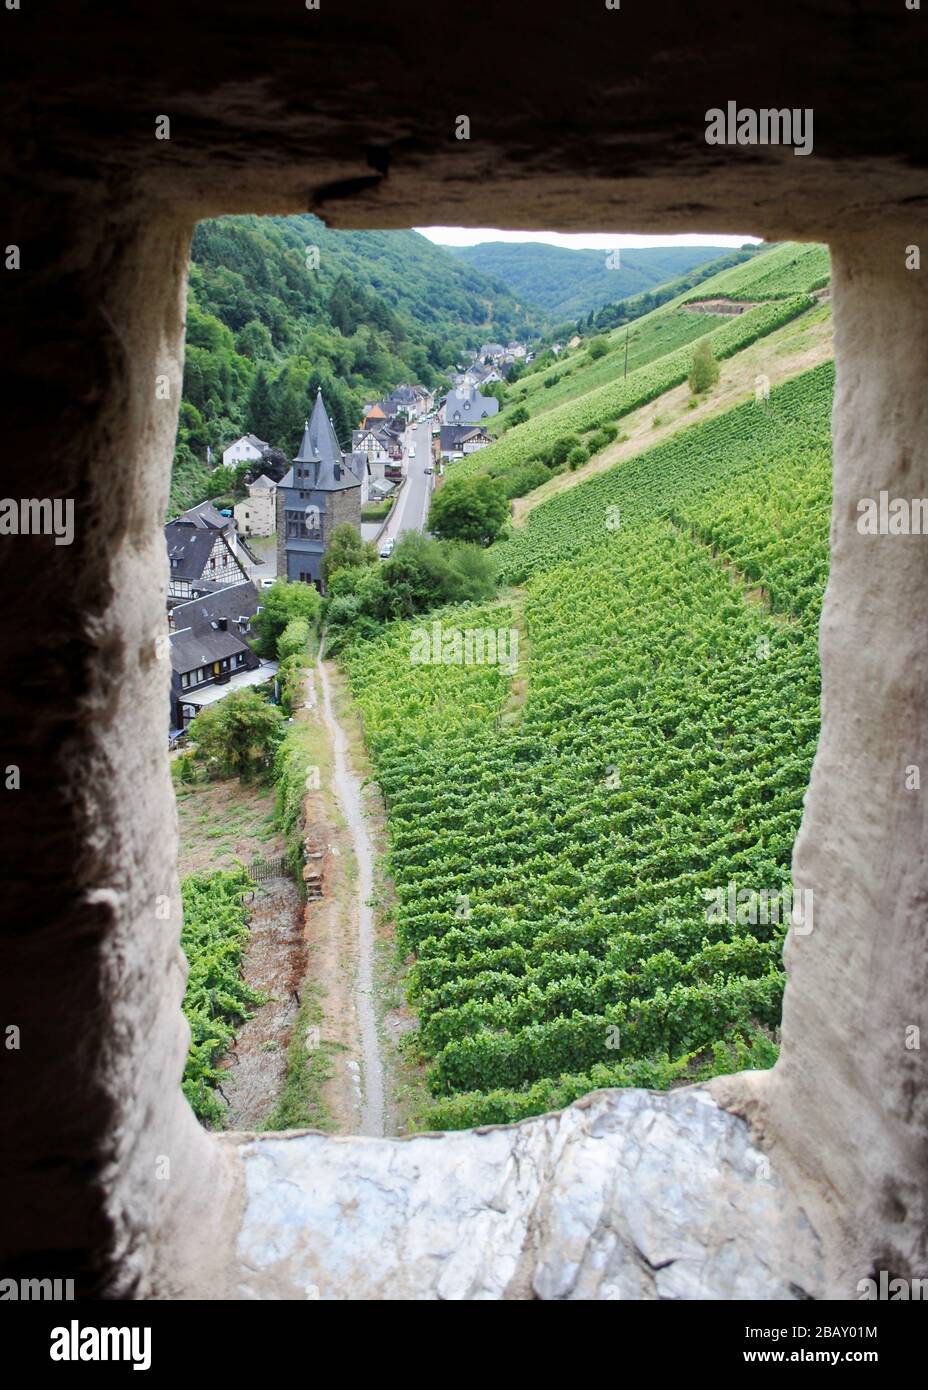 Looking out the Postenturm tower towards vineyards and grapevines and the Steeger Tor in Bacharach, Germany. Both towers were part of city's defense. Stock Photo